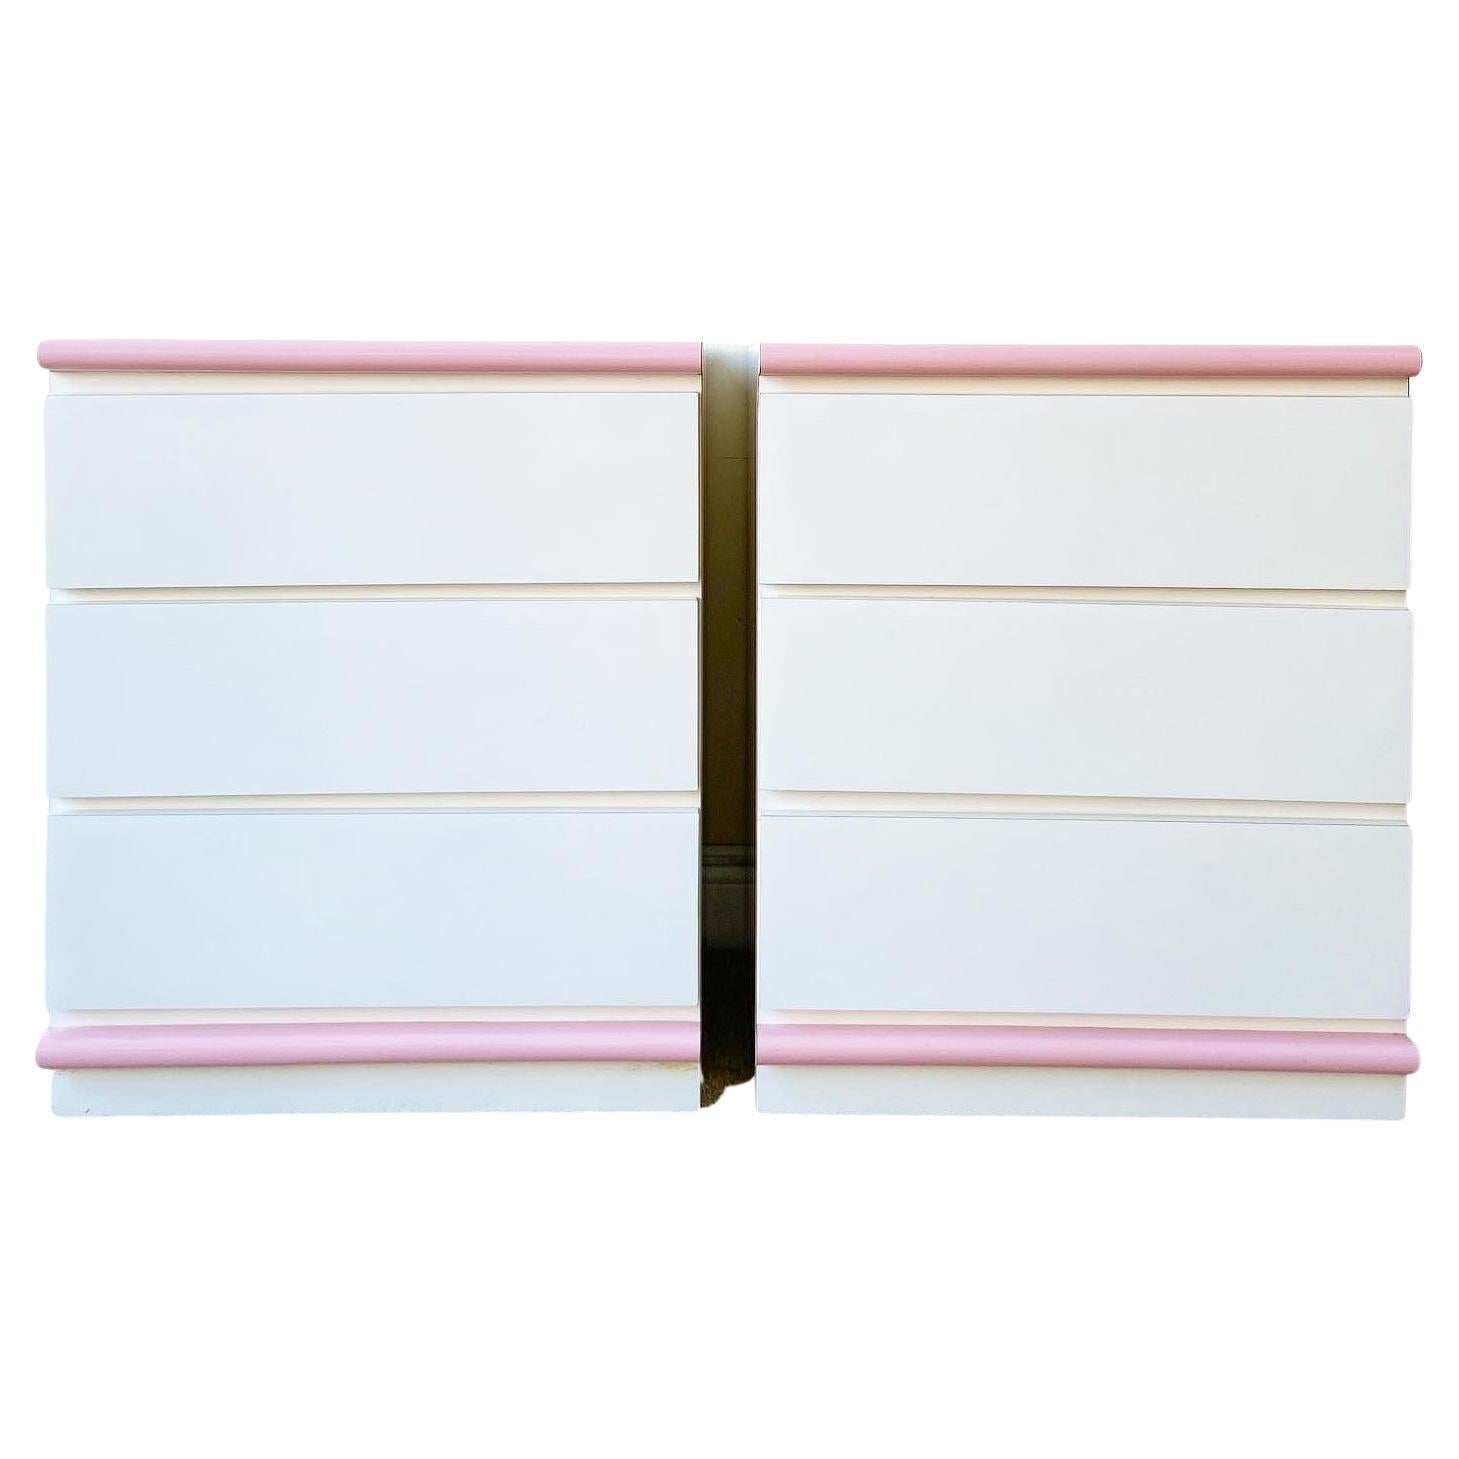 Pair of Postmodern Pink and White Lacquer Laminate Nightstands, 1980s